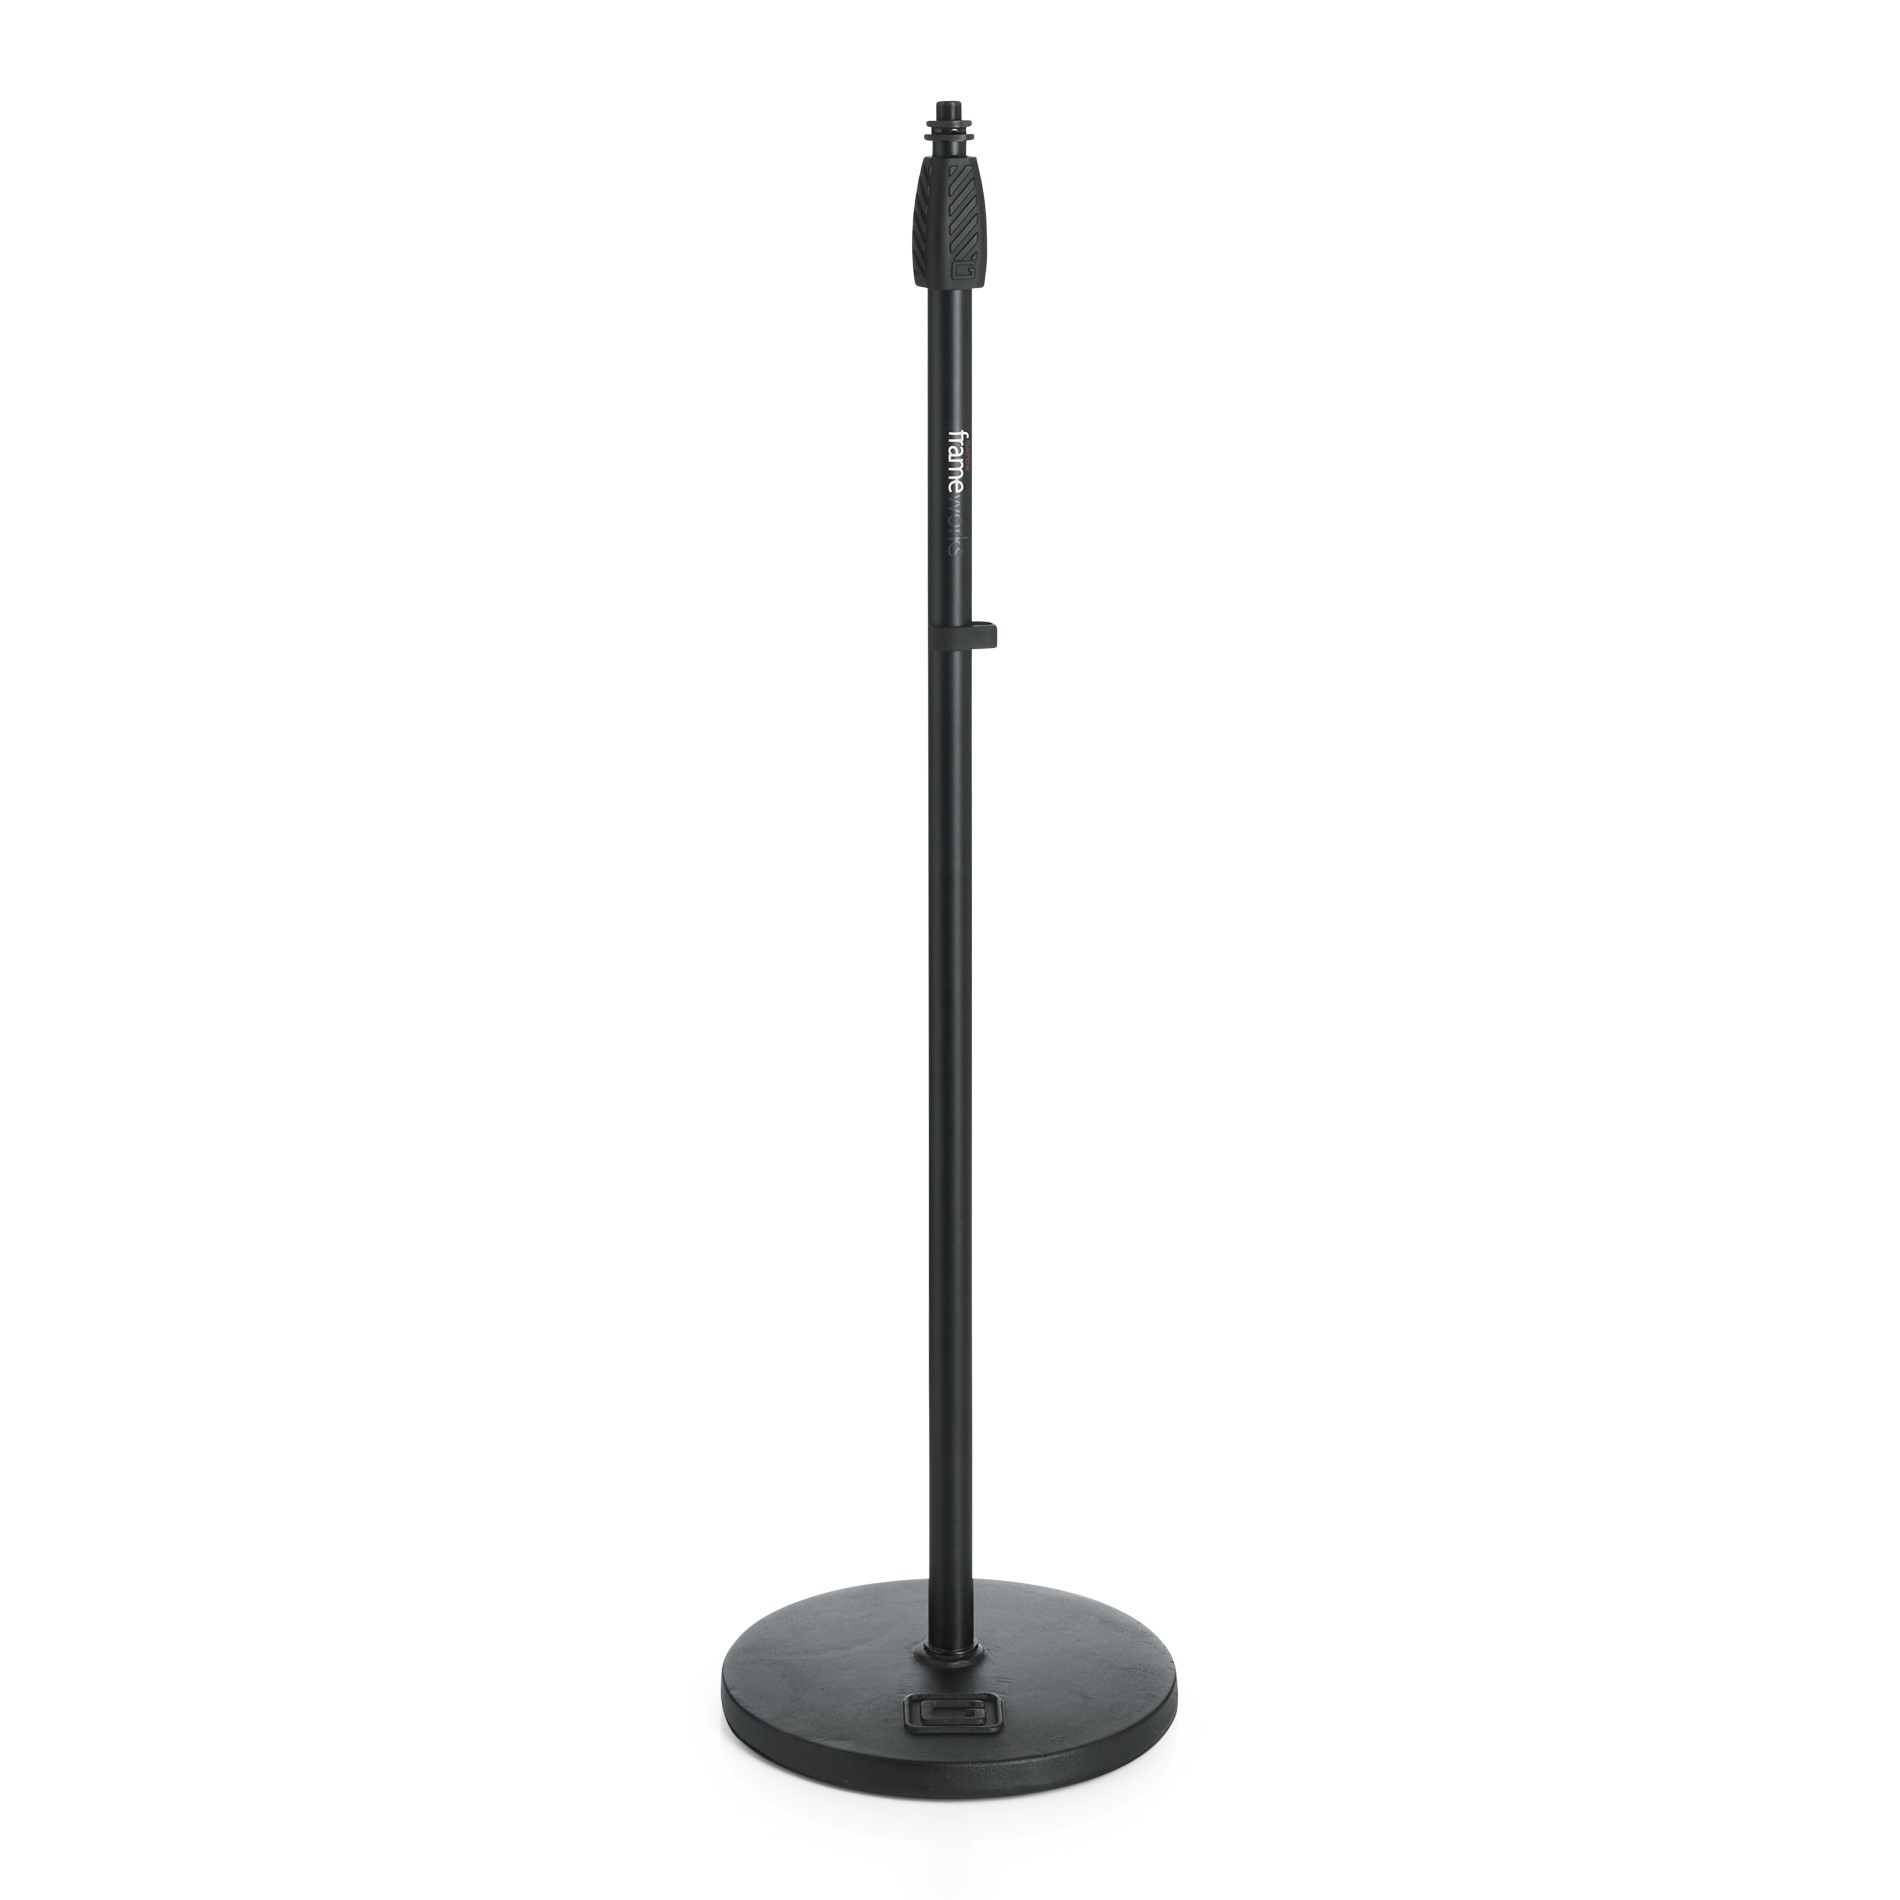 Microphone Stands & Accessories, Audio, Video and Lighting Accessories